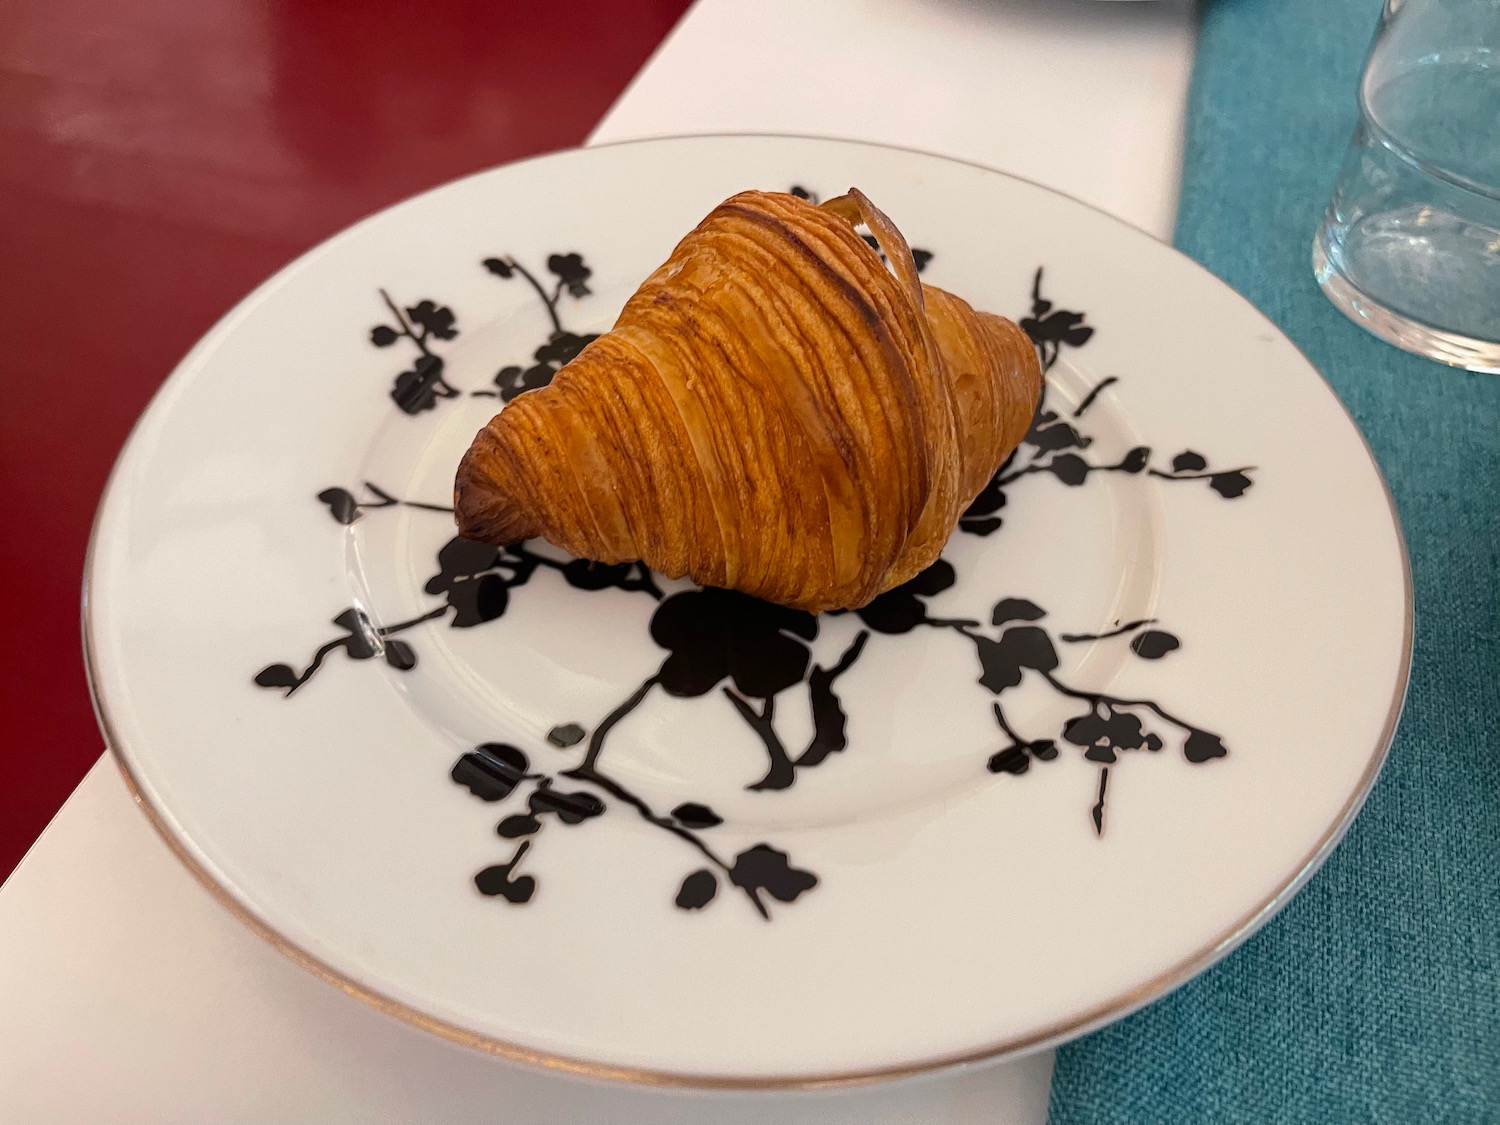 a croissant on a plate